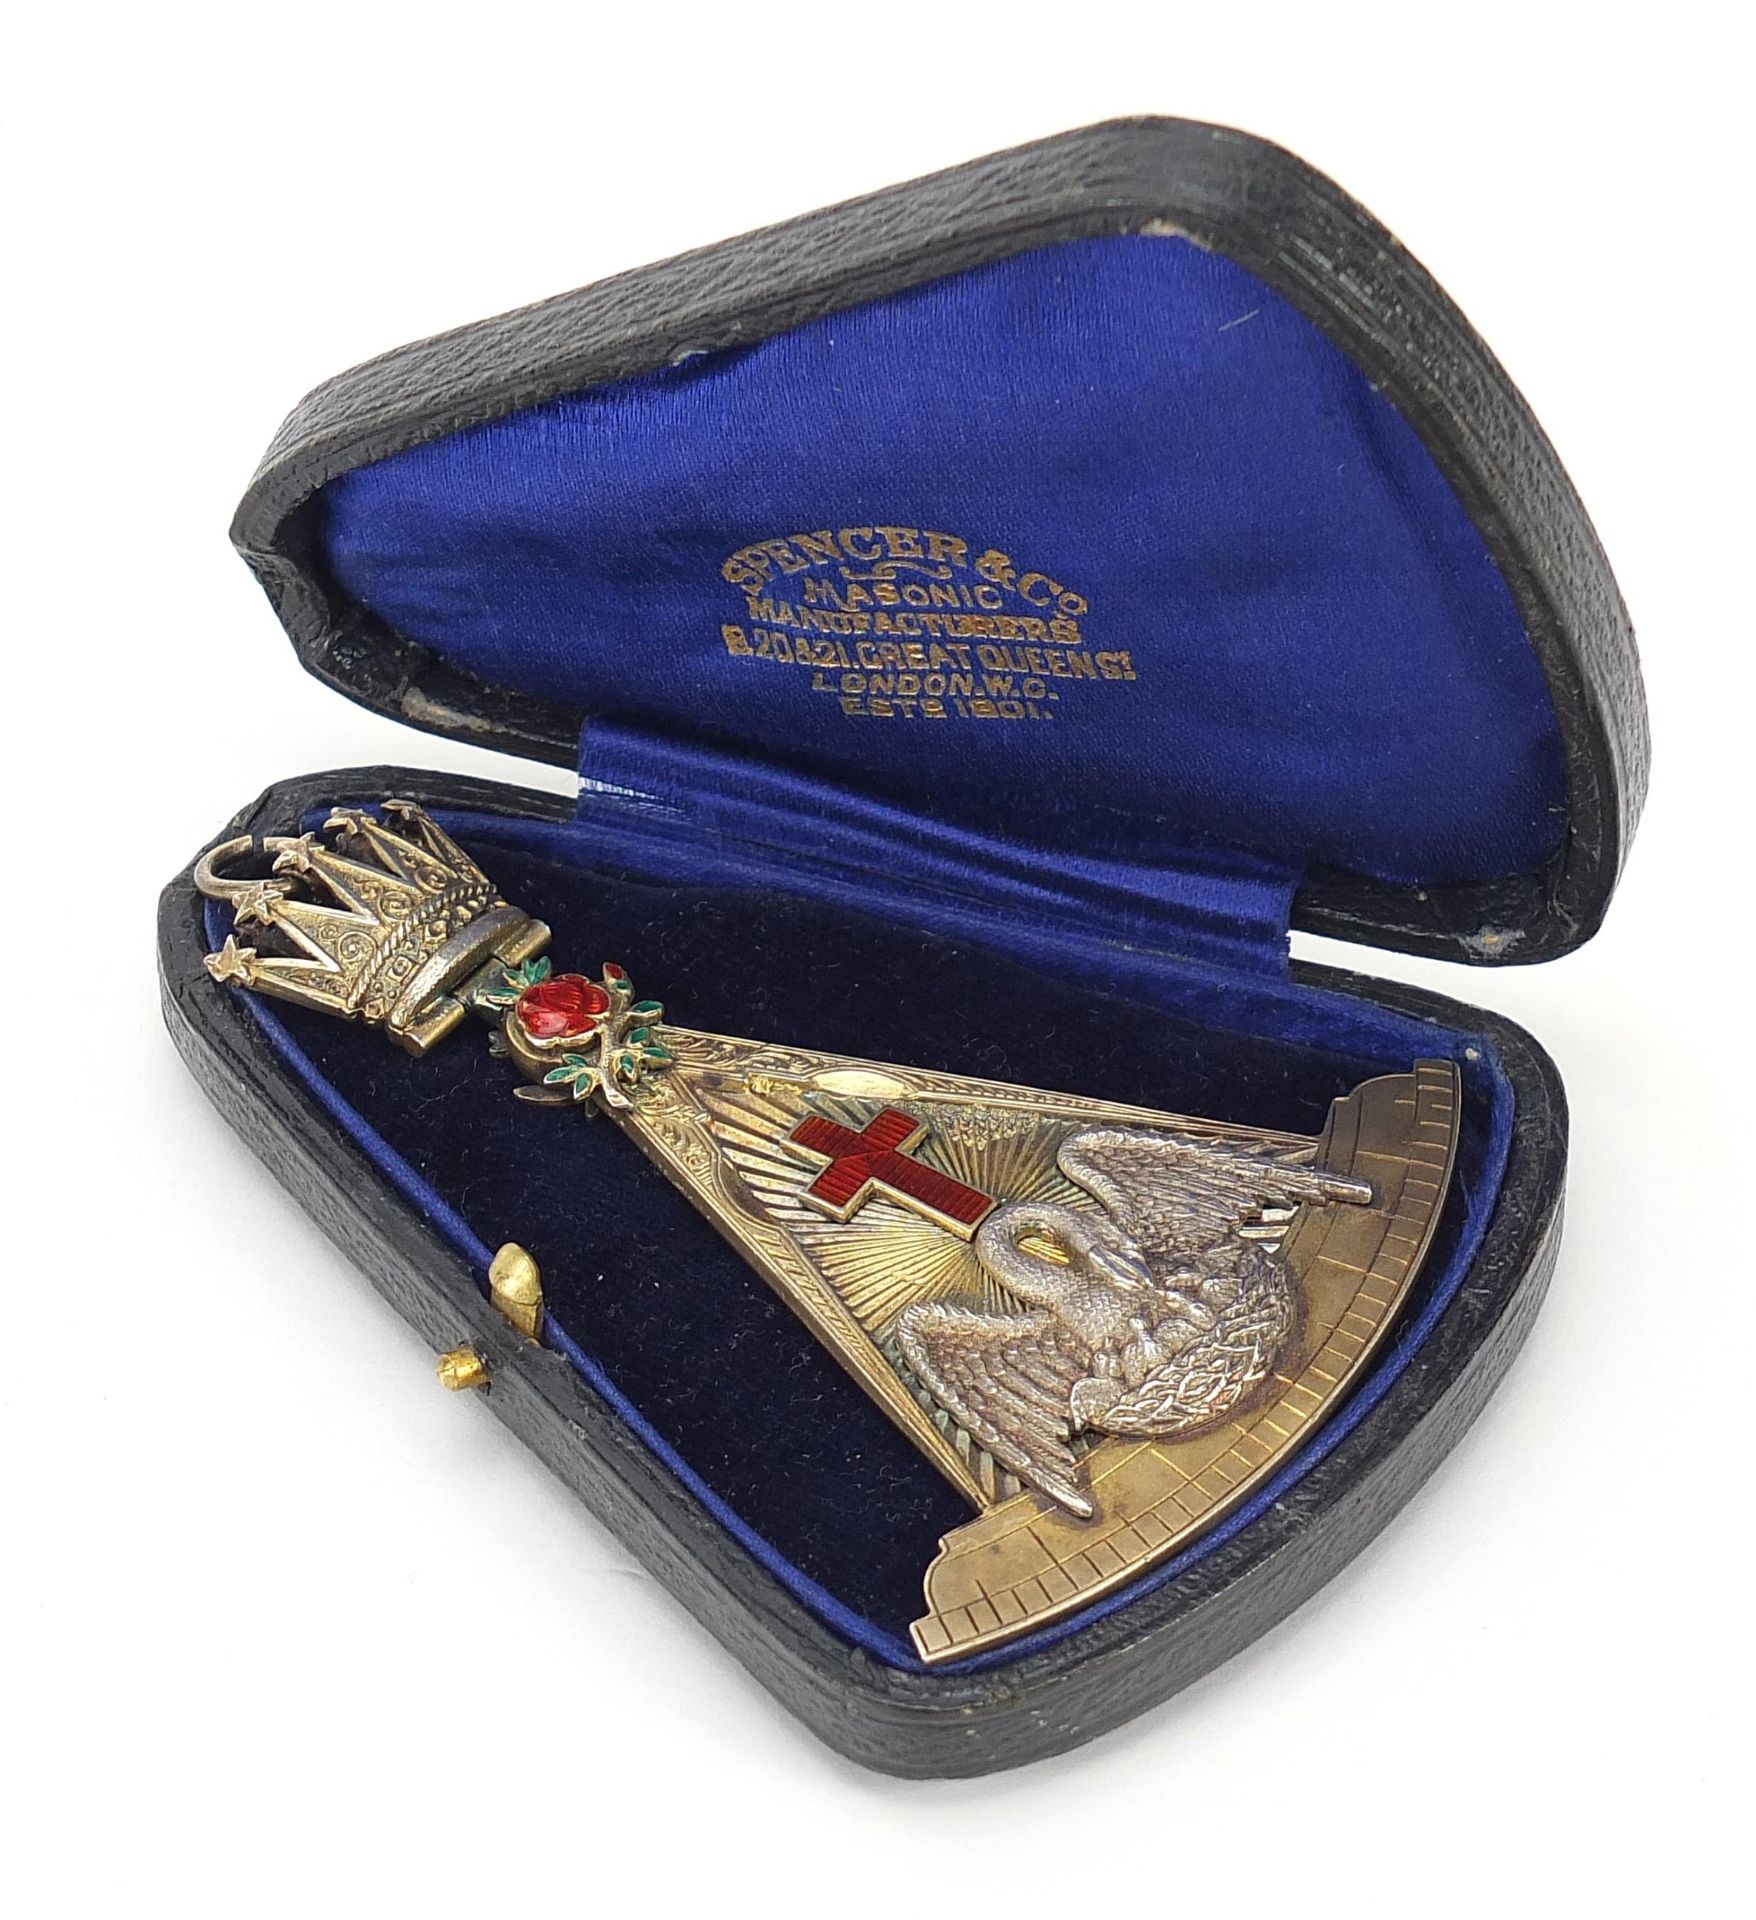 Masonic Rose Croix silver gilt and enamel 18th Degree Collar Jewel, housed in a fitted Spencer & - Image 4 of 5